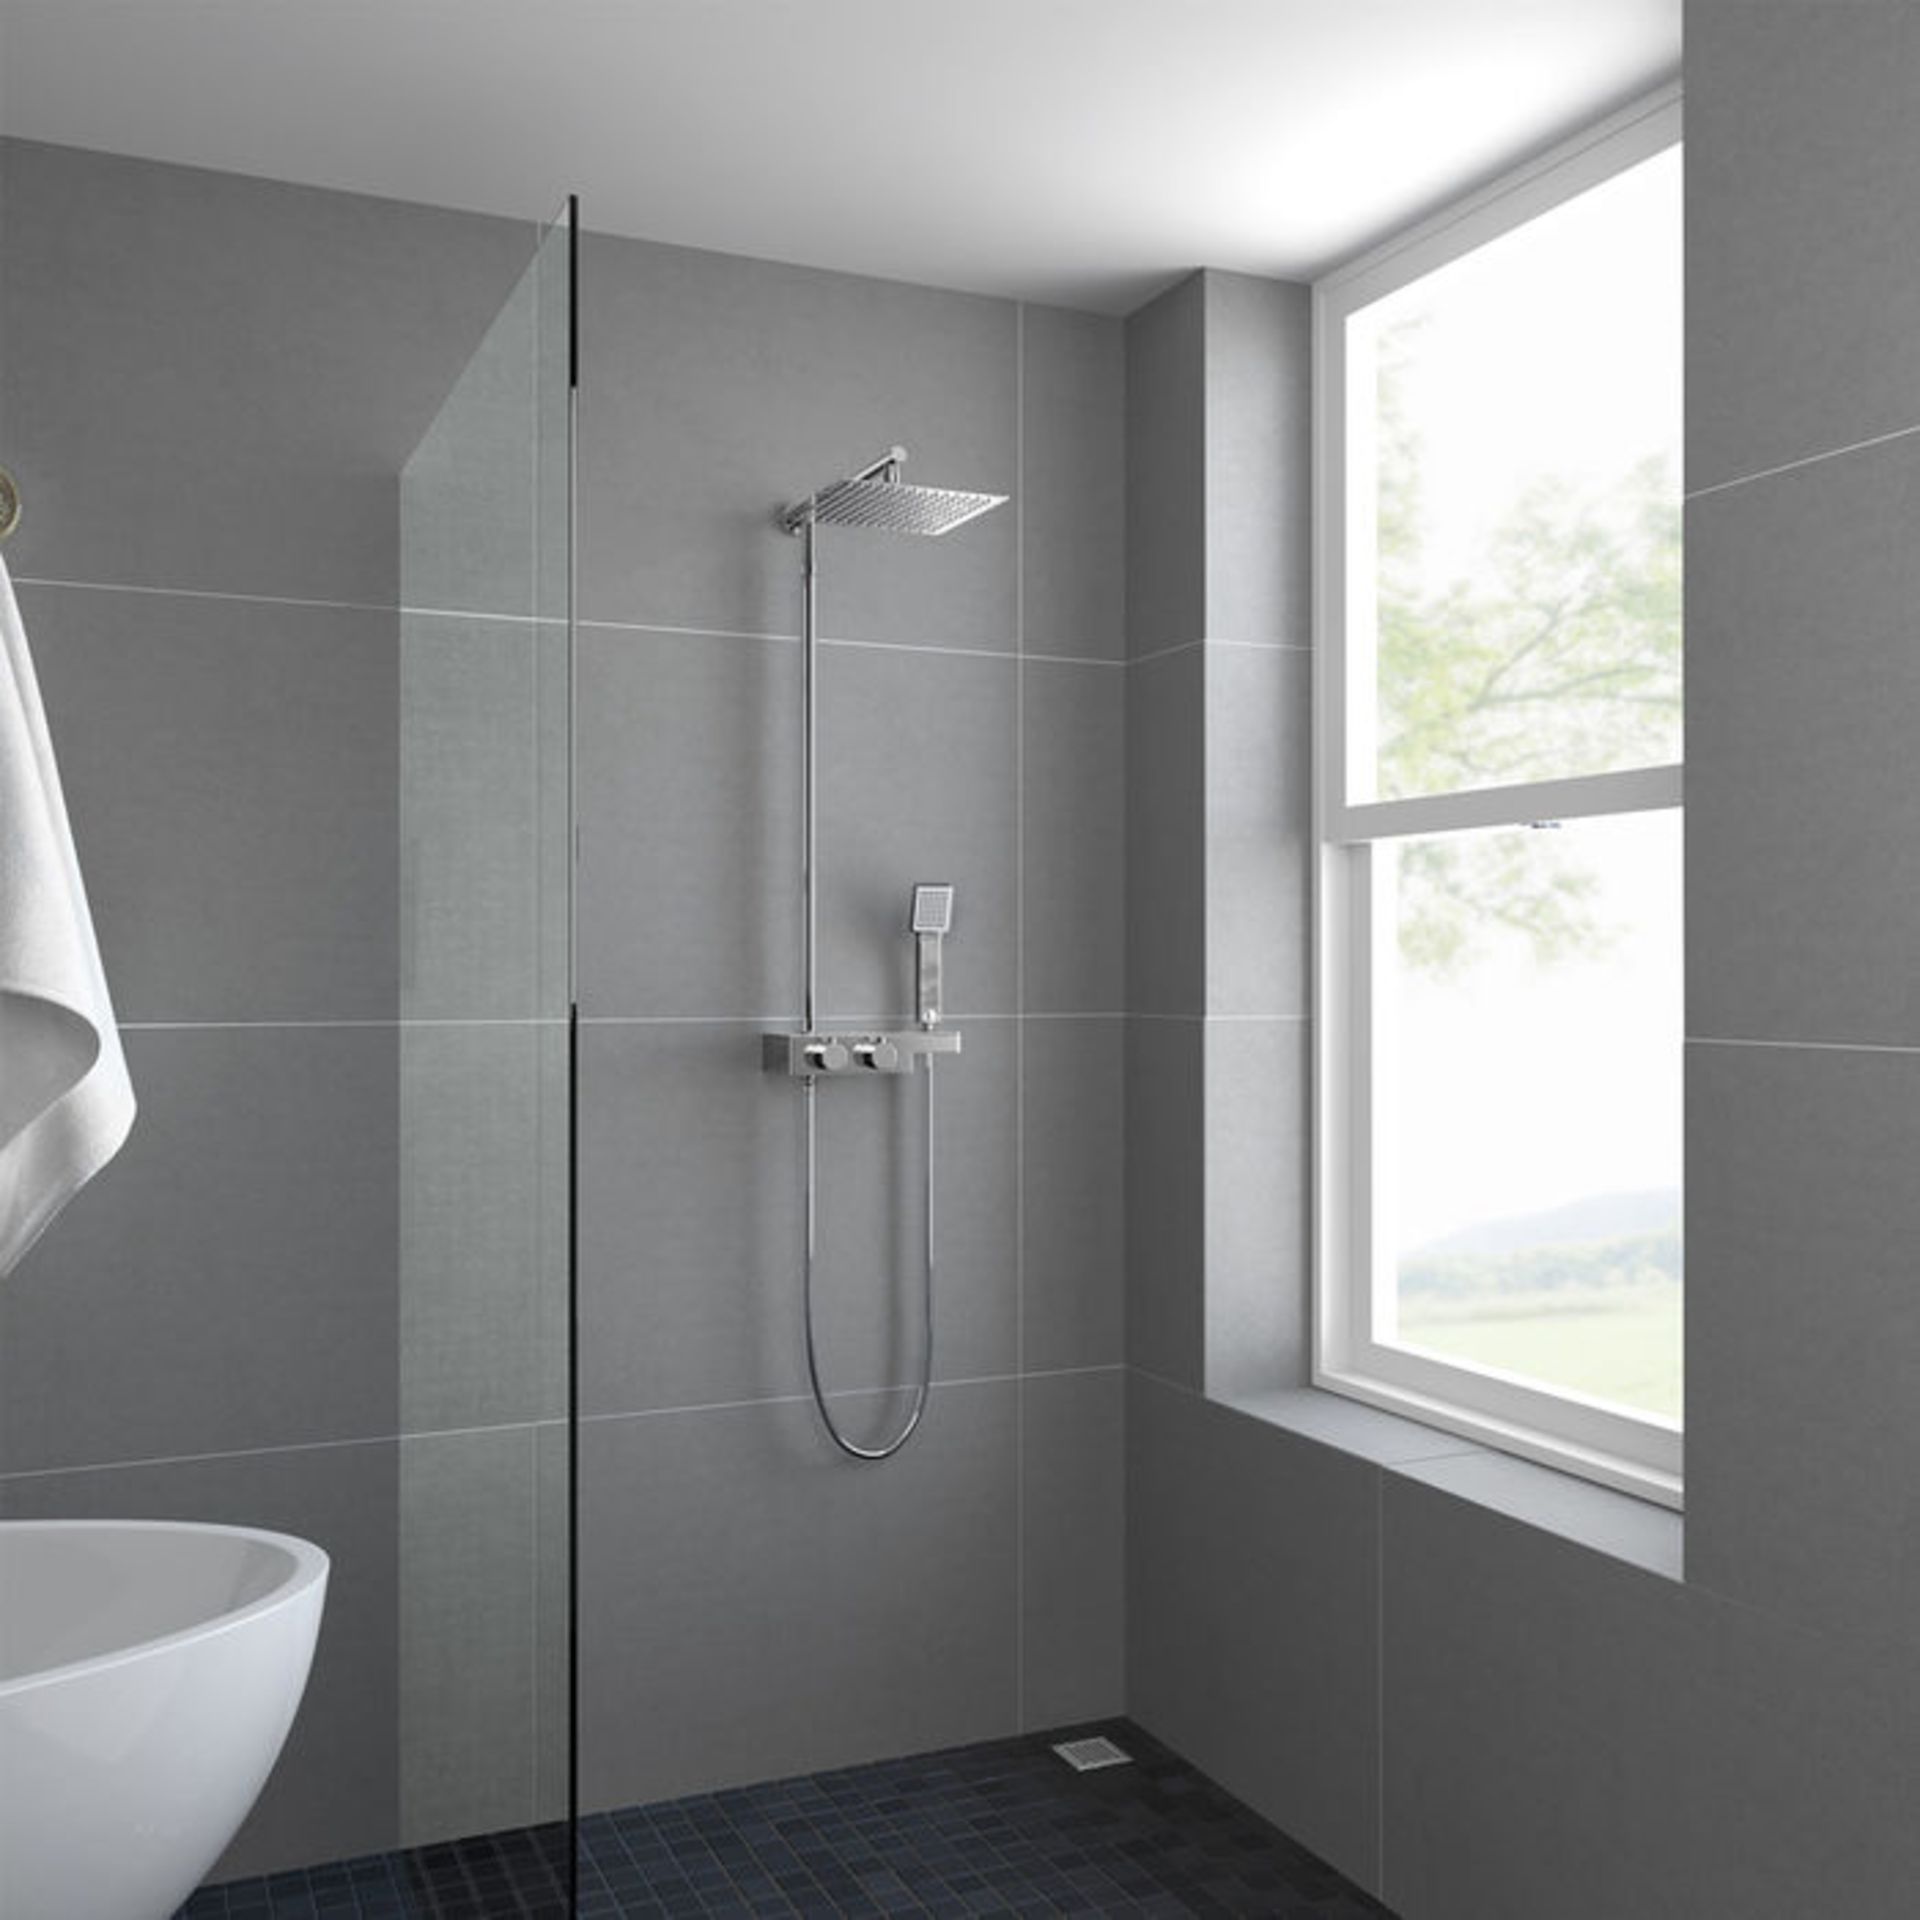 (H213) Square Exposed Thermostatic Shower Shelf, Kit & Large Head. RRP £349.99. Style meets function - Image 3 of 6